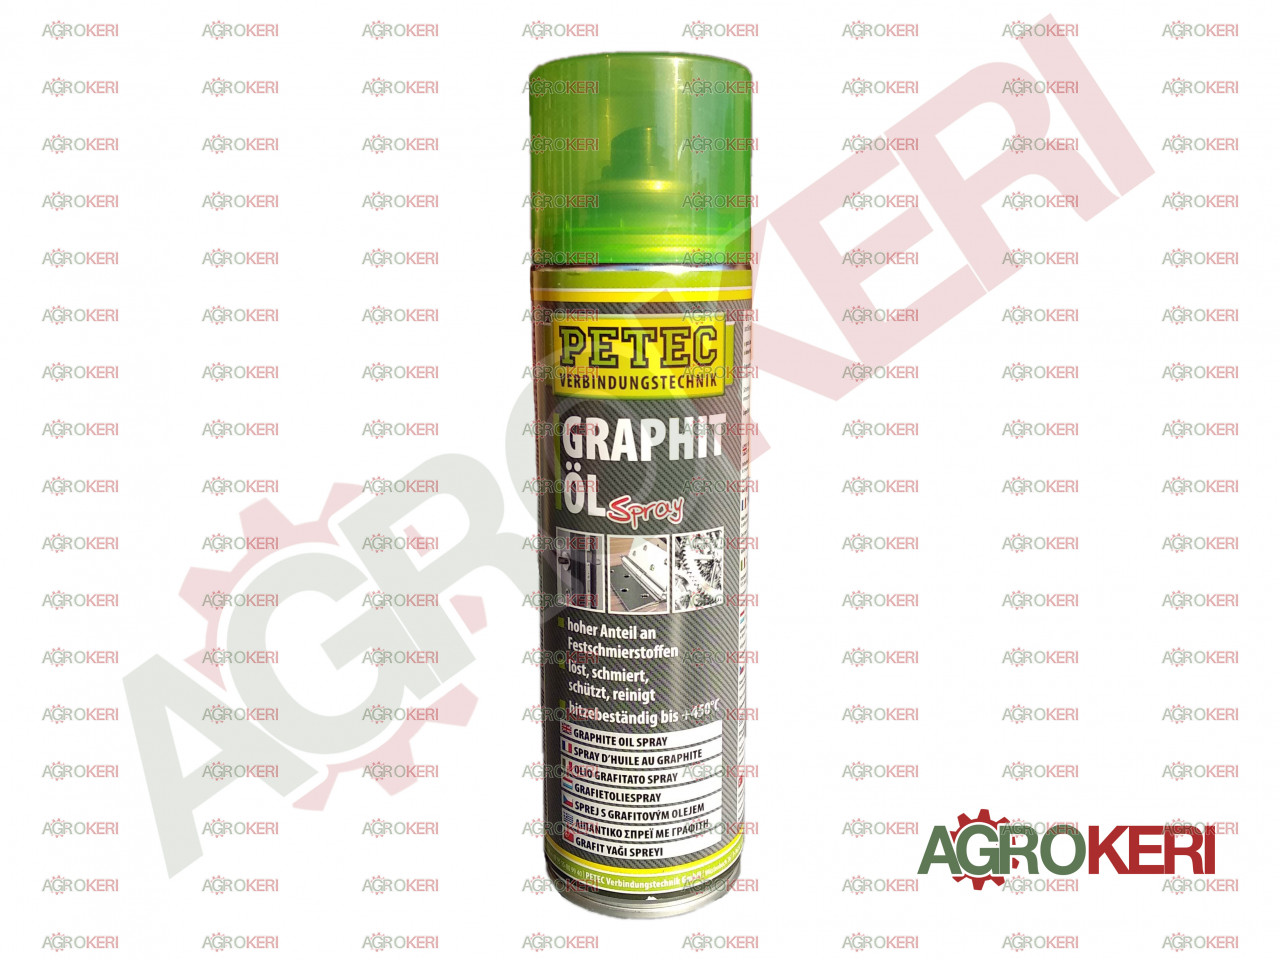 https://www.agrokeri.hu/images/products/001318-01.jpg?t=1&f=ws&w=1280